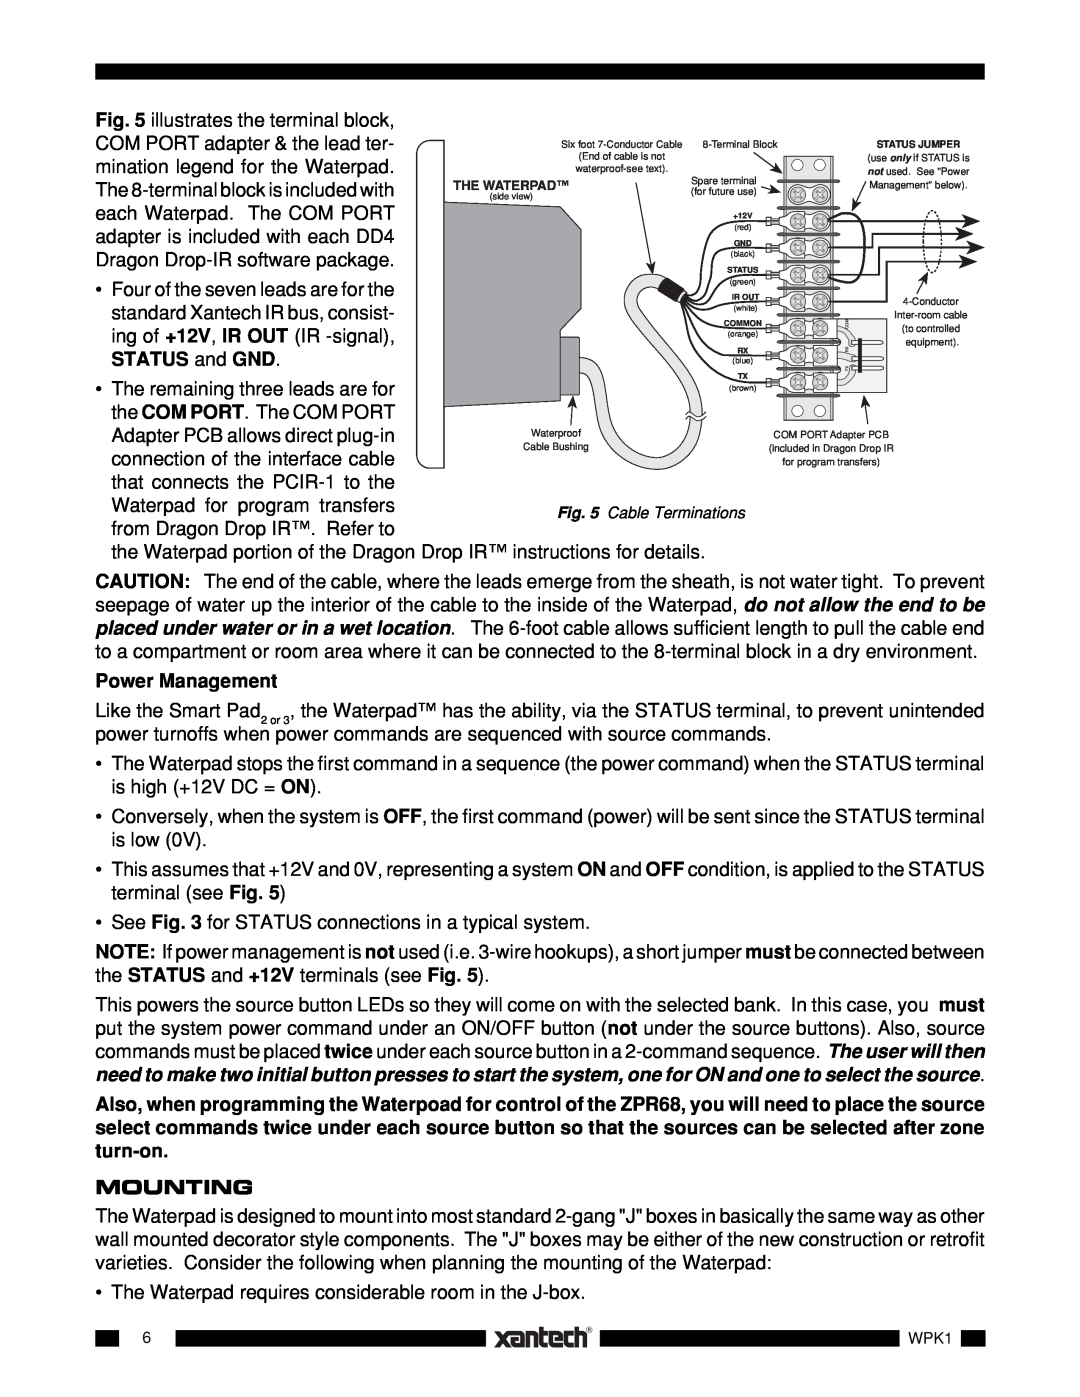 Xantech WPK4, WPK8, WPK6, WPK1 installation instructions STATUS and GND, Power Management, Mounting 